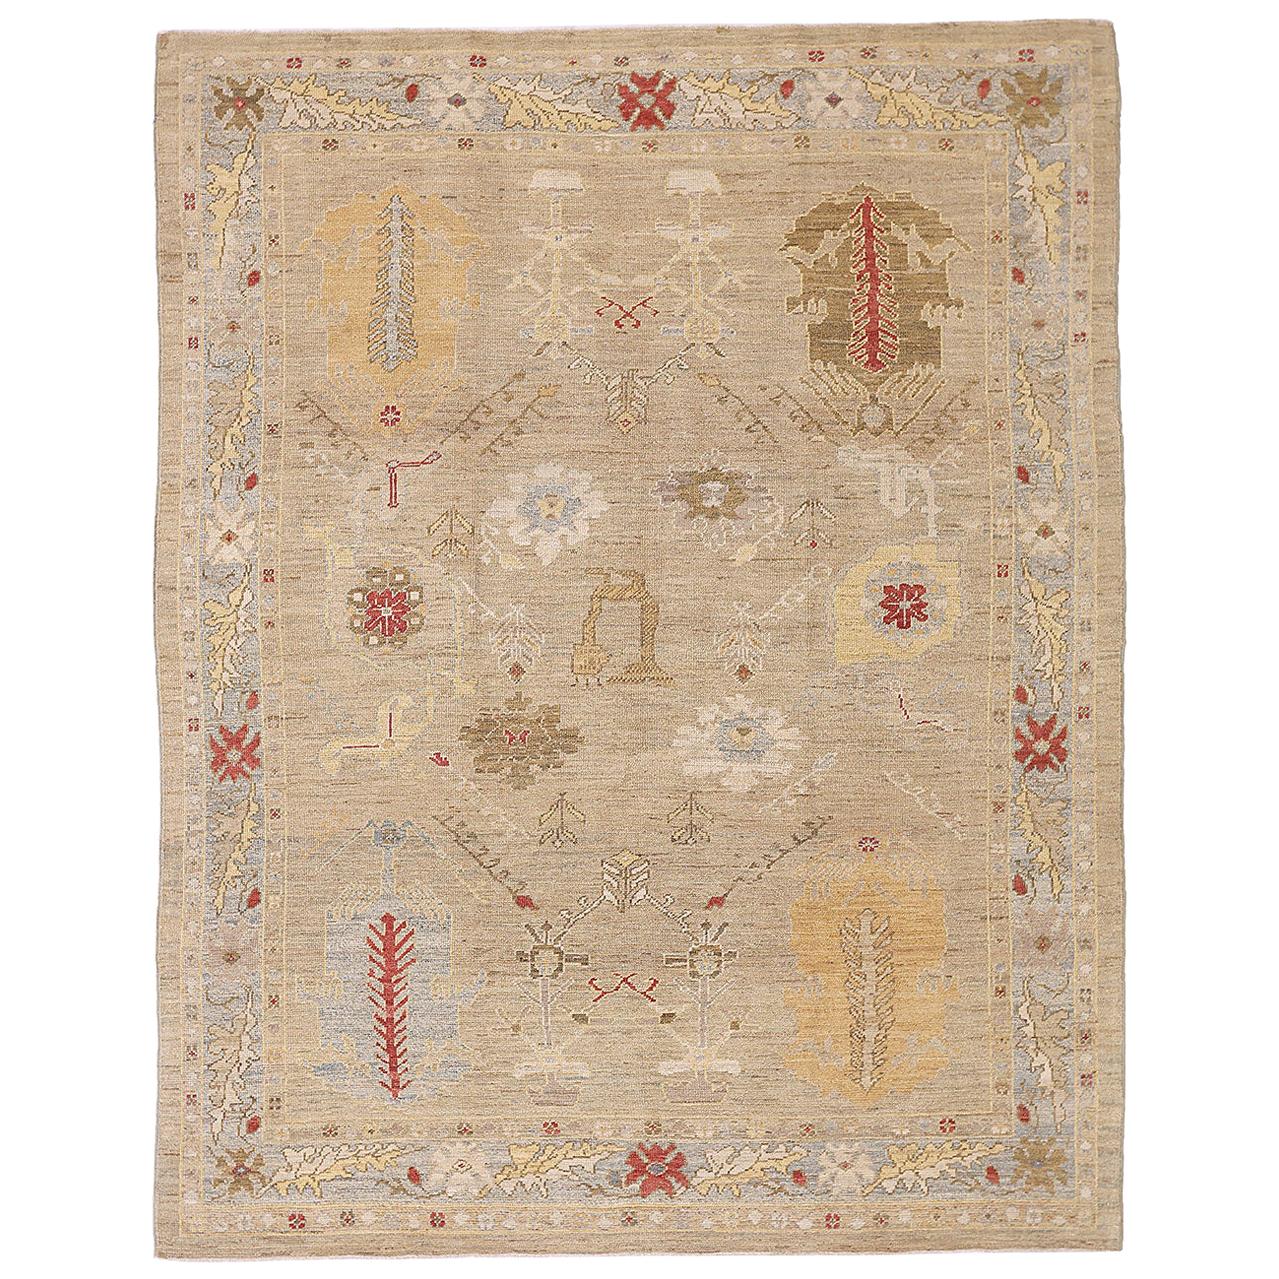 New Persian Oushak Style Rug with Colored Botanical Details on Beige Field